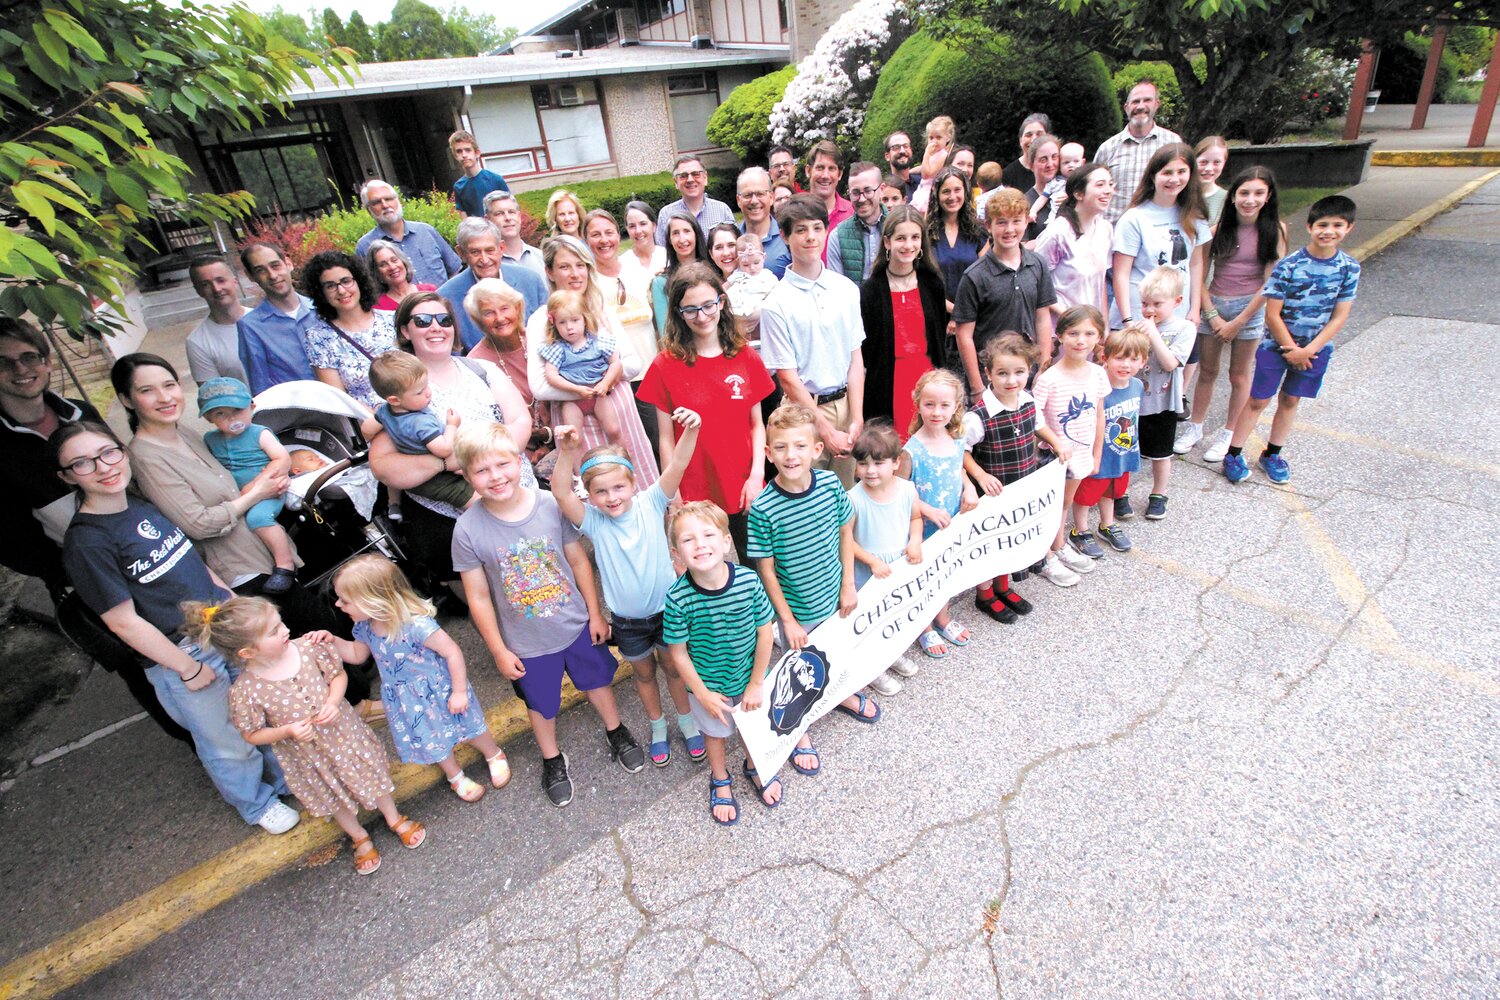 WITH A COMMON GOAL: Founders, board members, future students and their parts of Chesterton Academy of Our Lady of Hope gather outside the former St. Francis of Assisi Church and School in Warwick that the academy acquired on May 31 from the Diocese of Providence. (Cranston Herald photos)